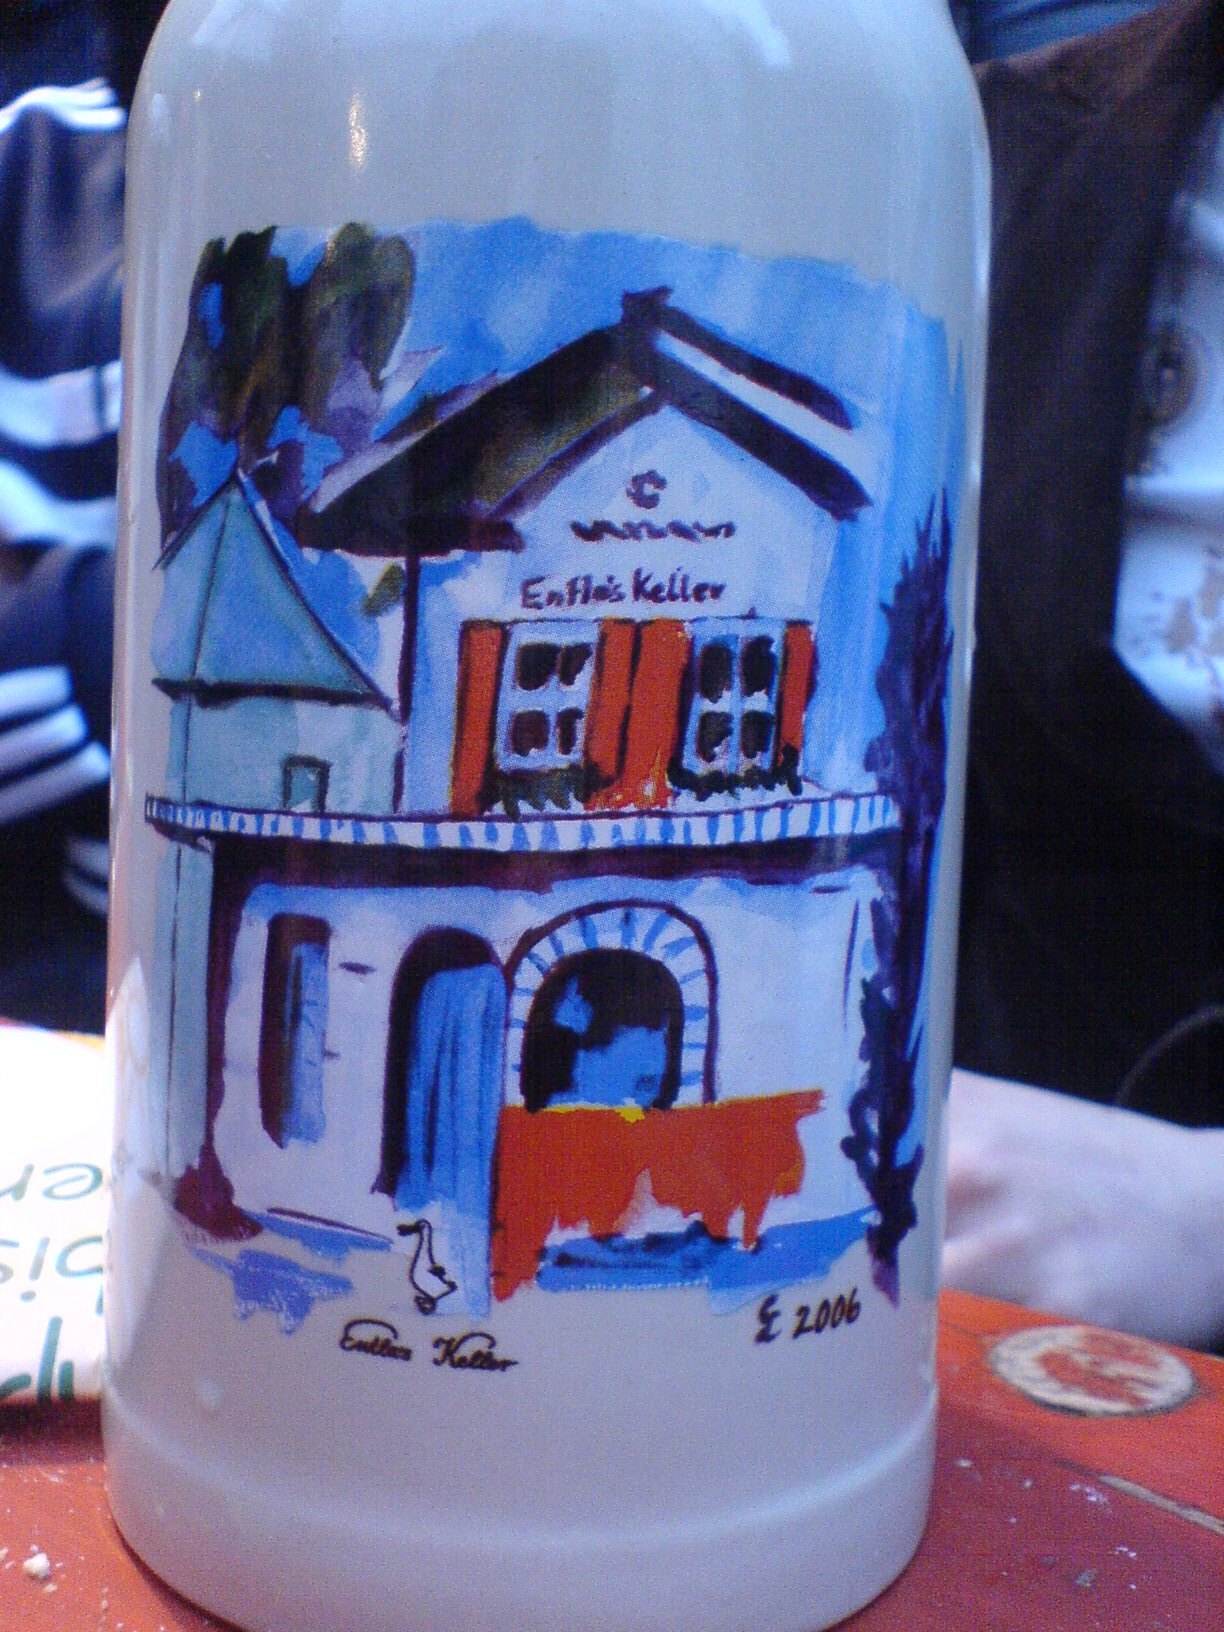 a colorfully decorated bottle is on the table